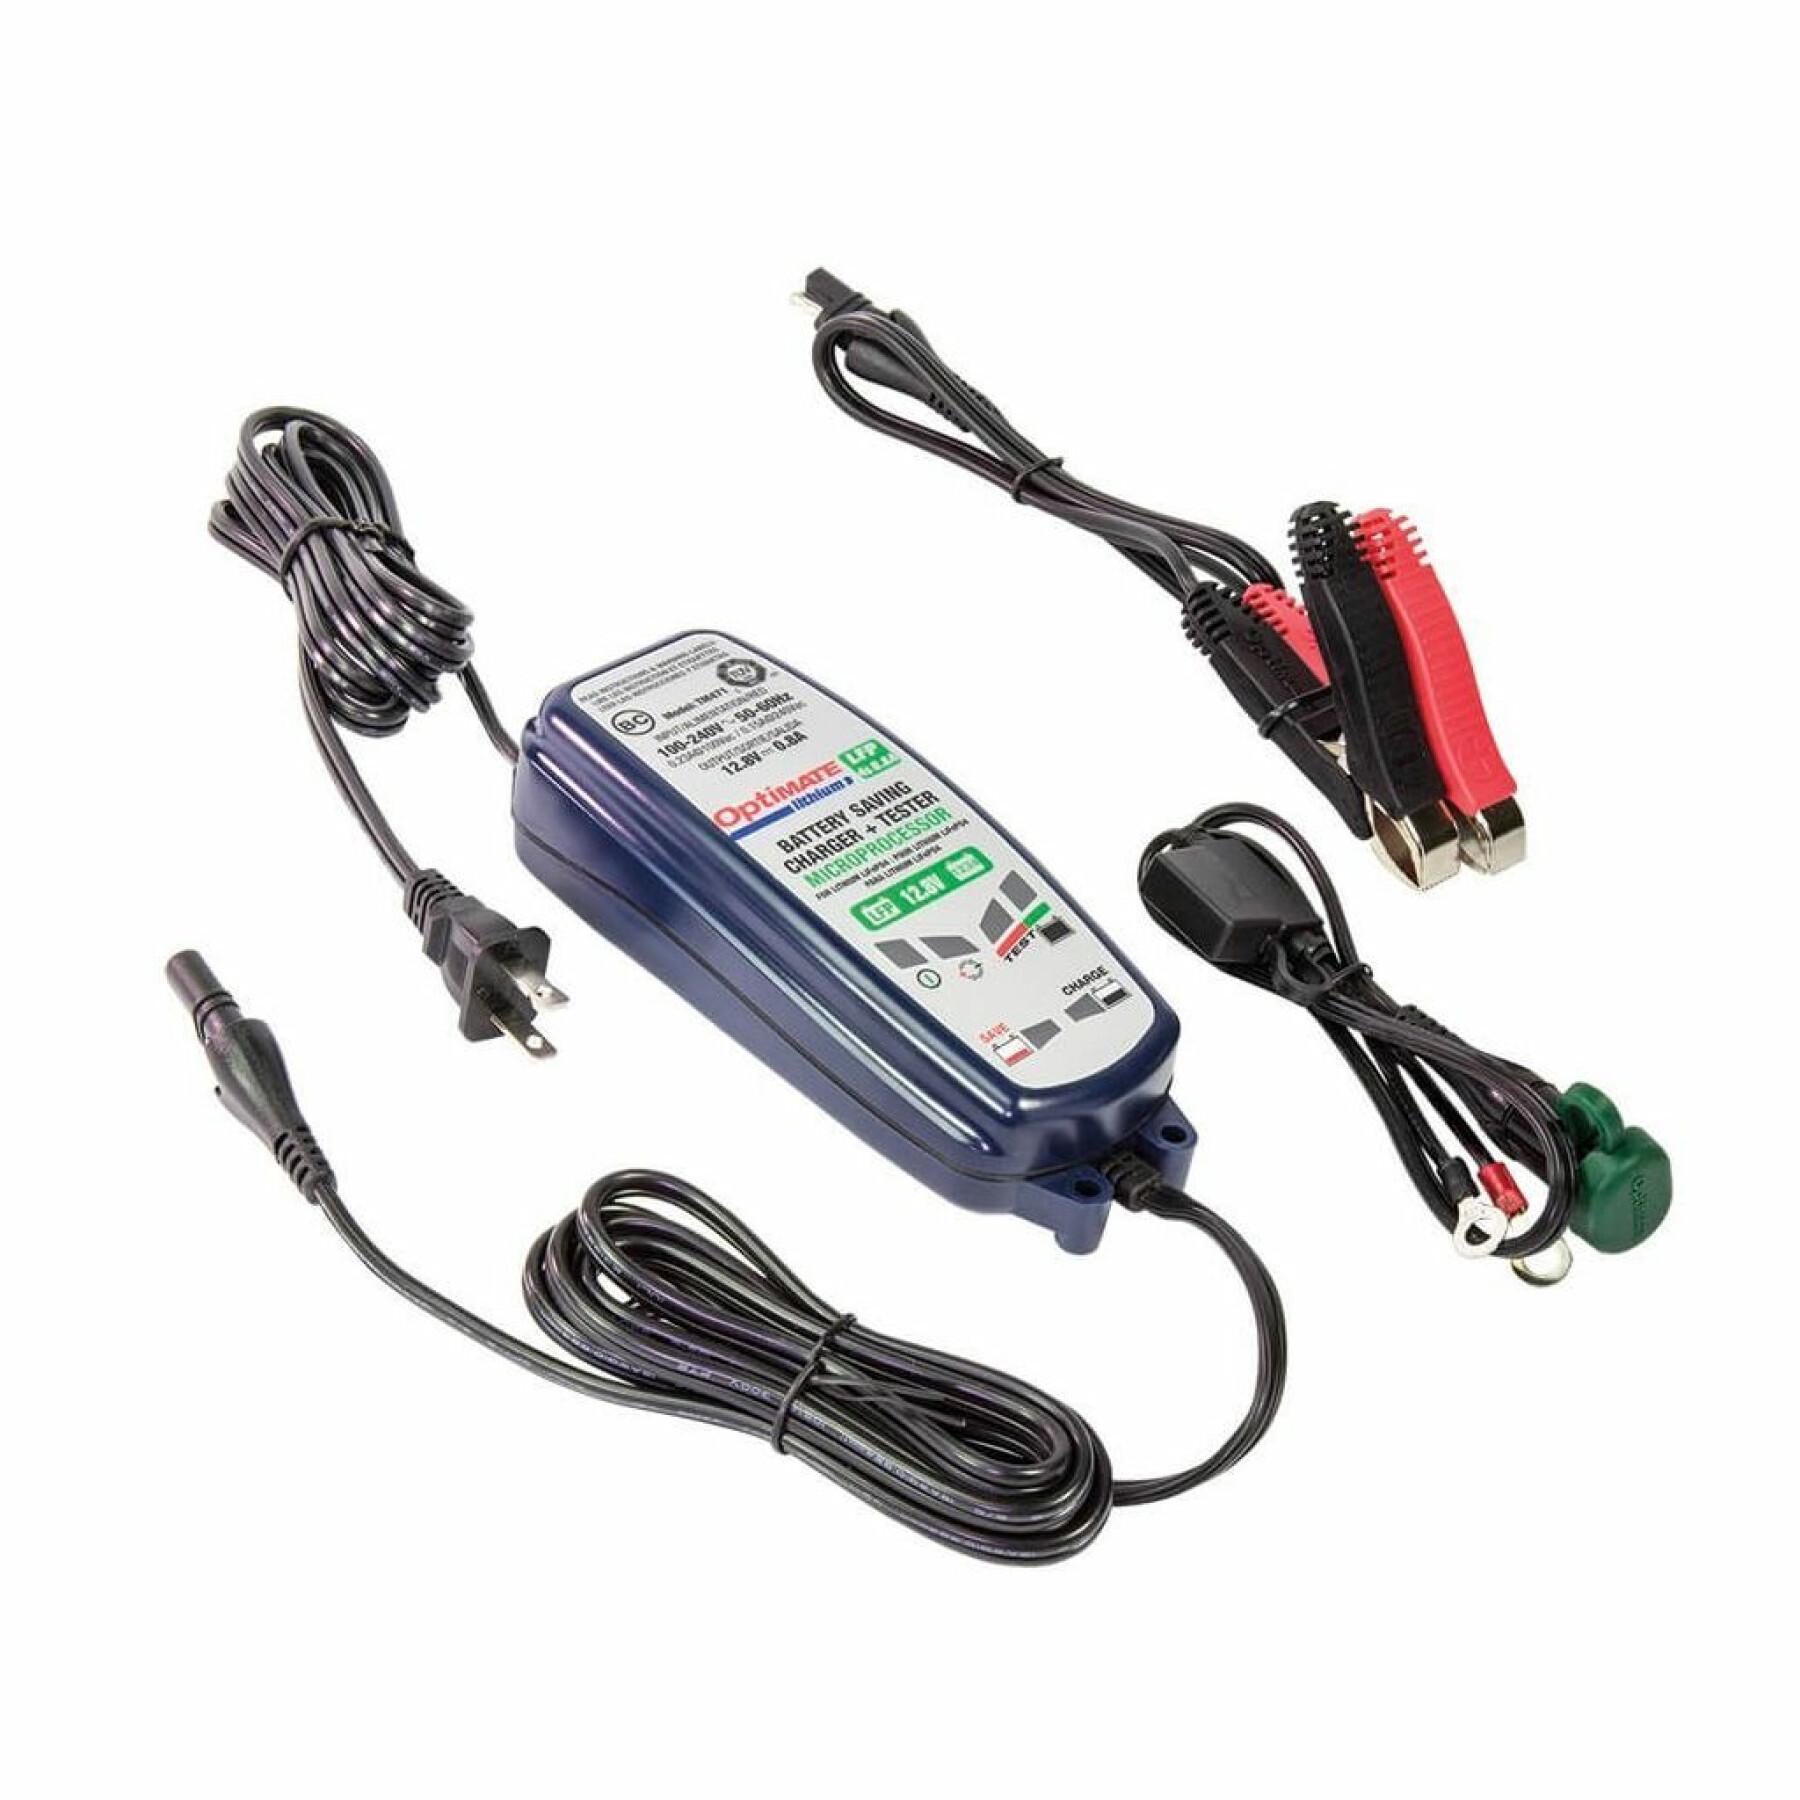 Motorcycle battery charger Tecmate Optimate Lithium 0.8A